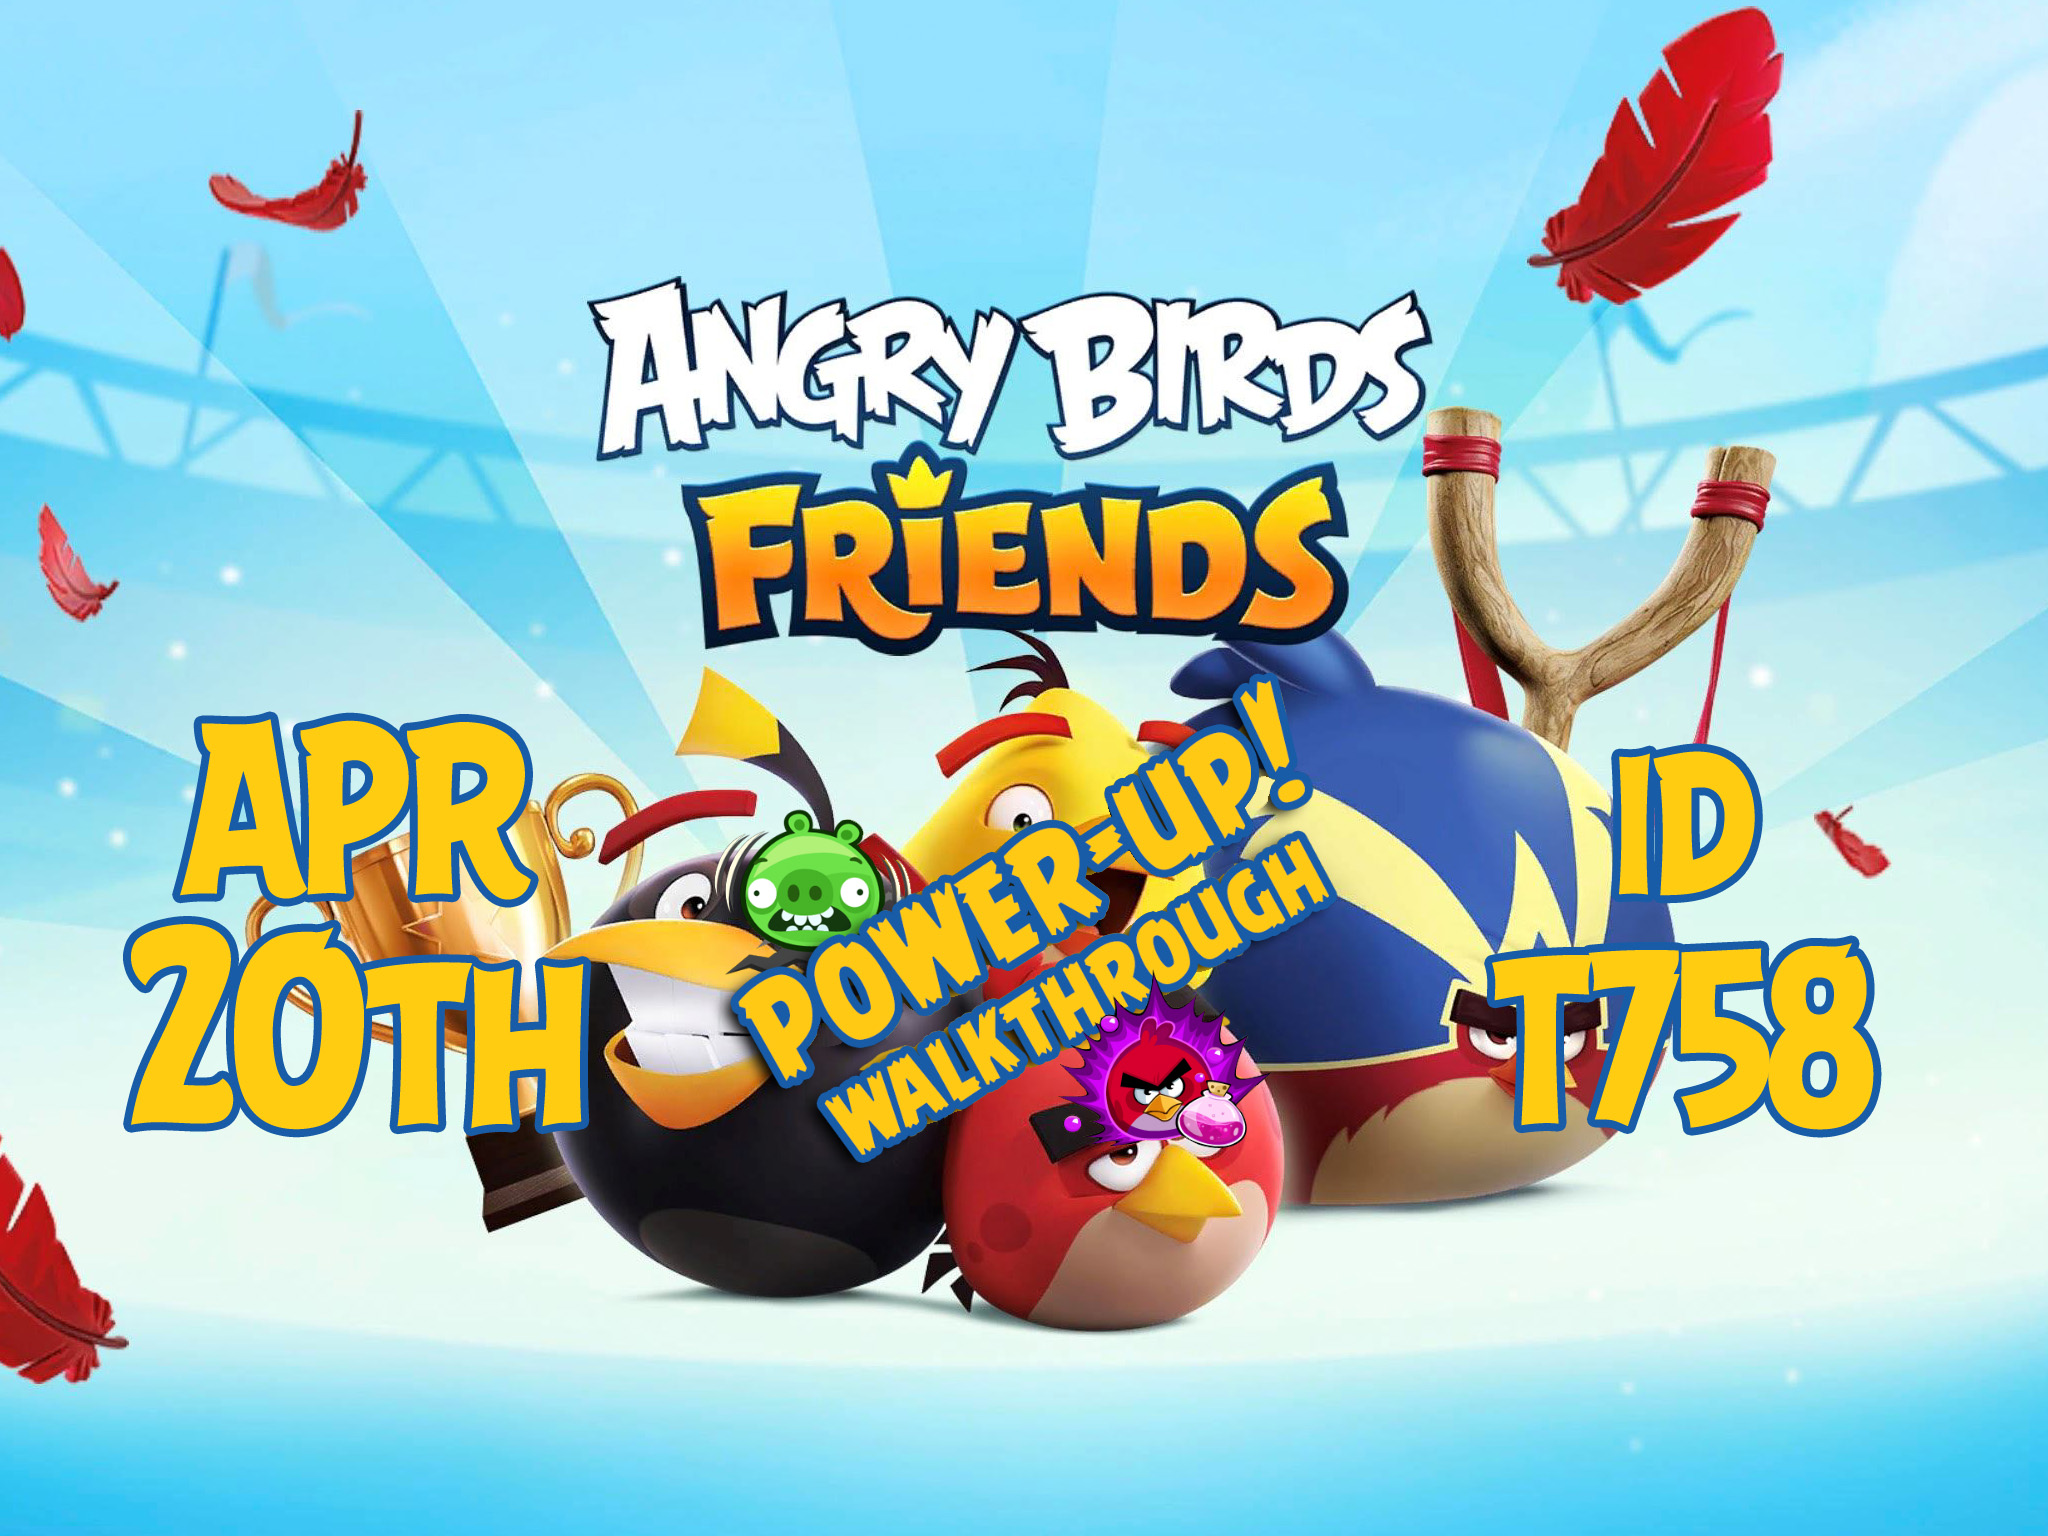 Angry-Birds-Friends-Tournament-T758-Feature-Image-PU